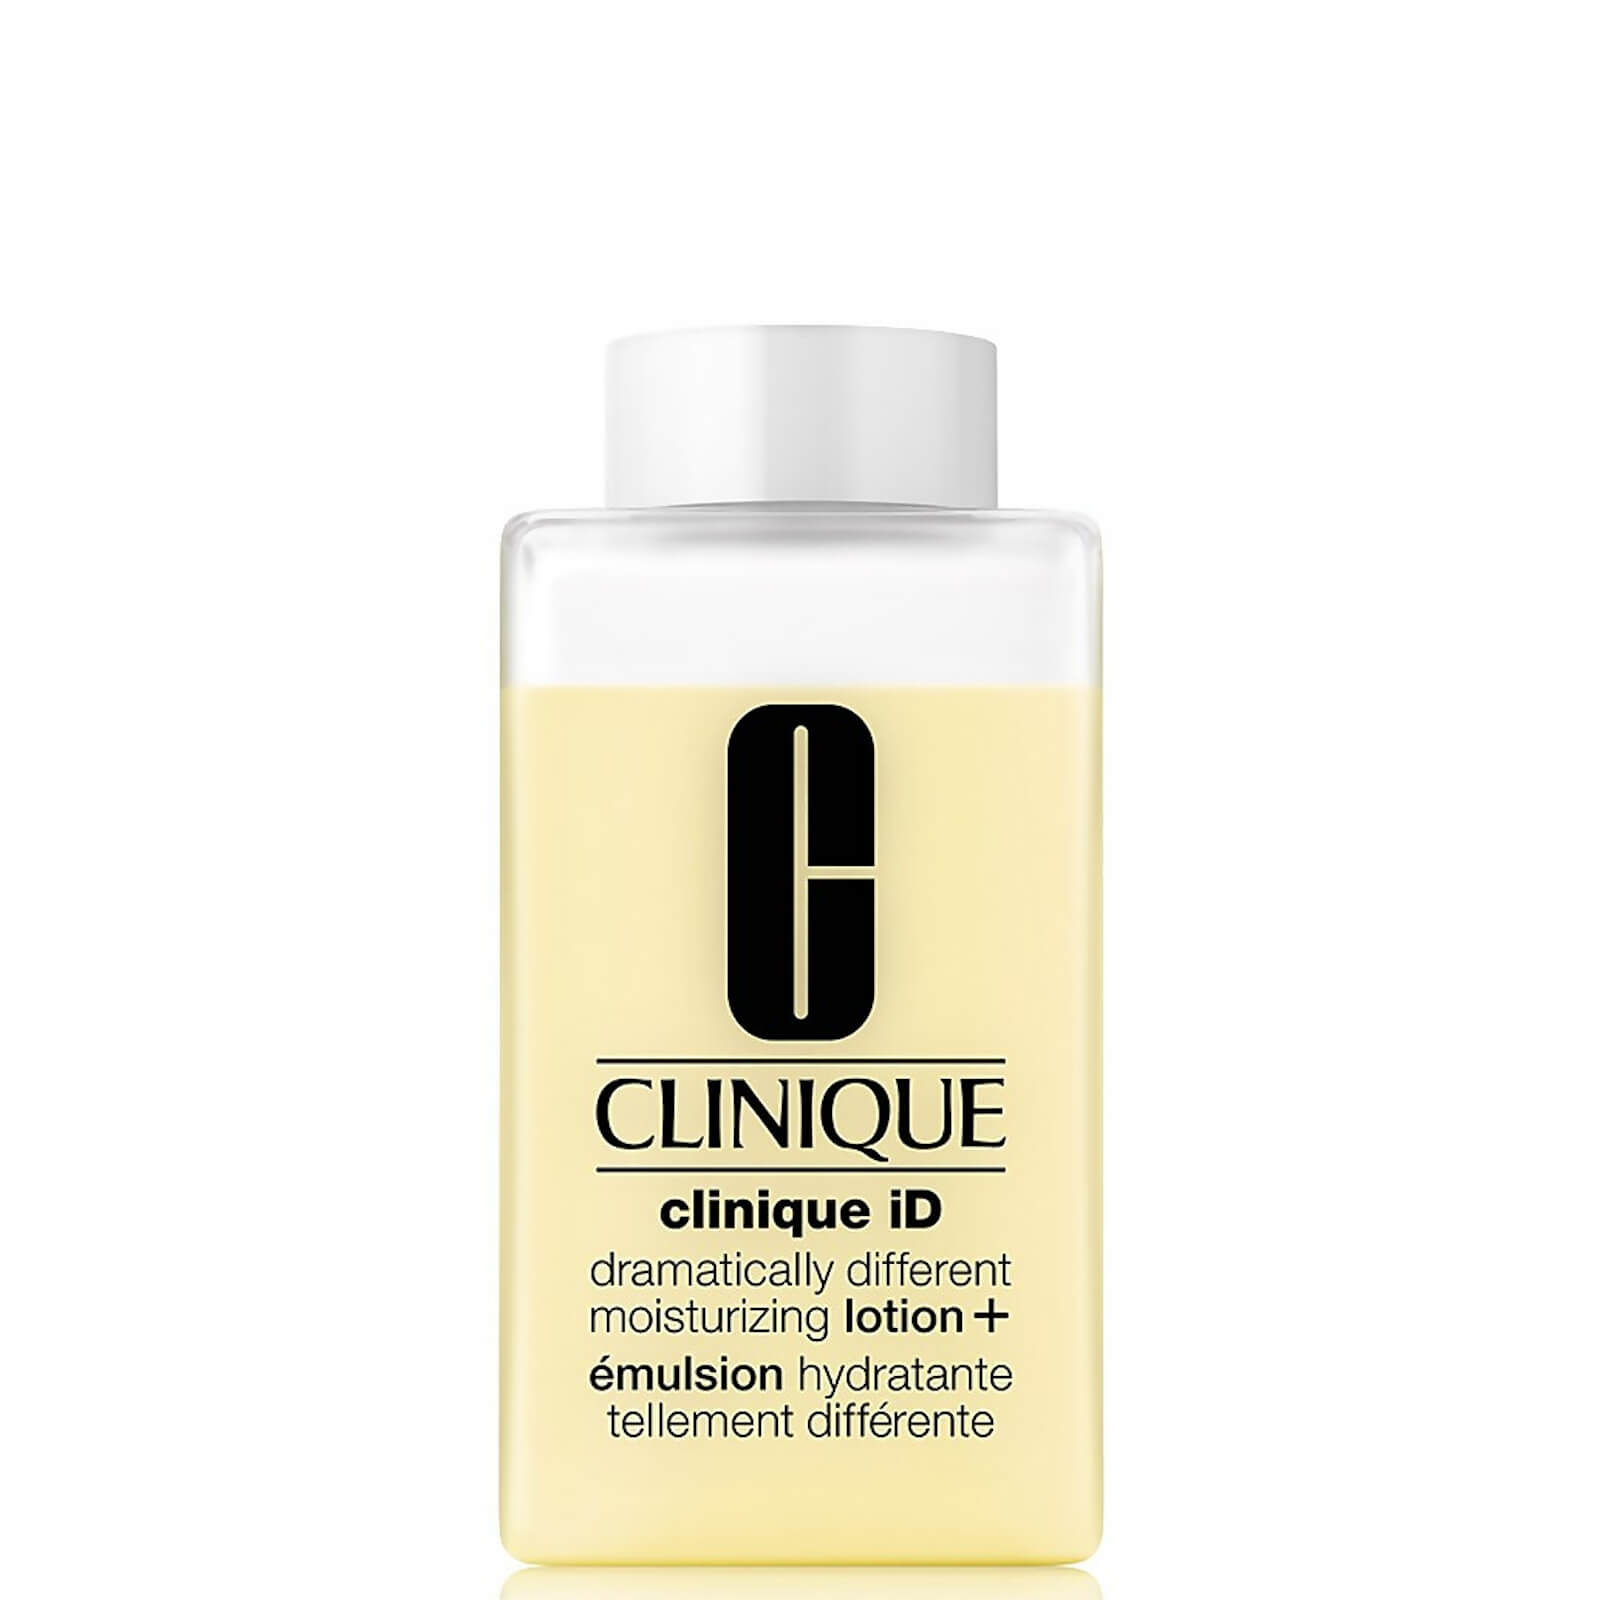 Clinique iD Dramatically Different Moisturizing Lotion+ 115ml